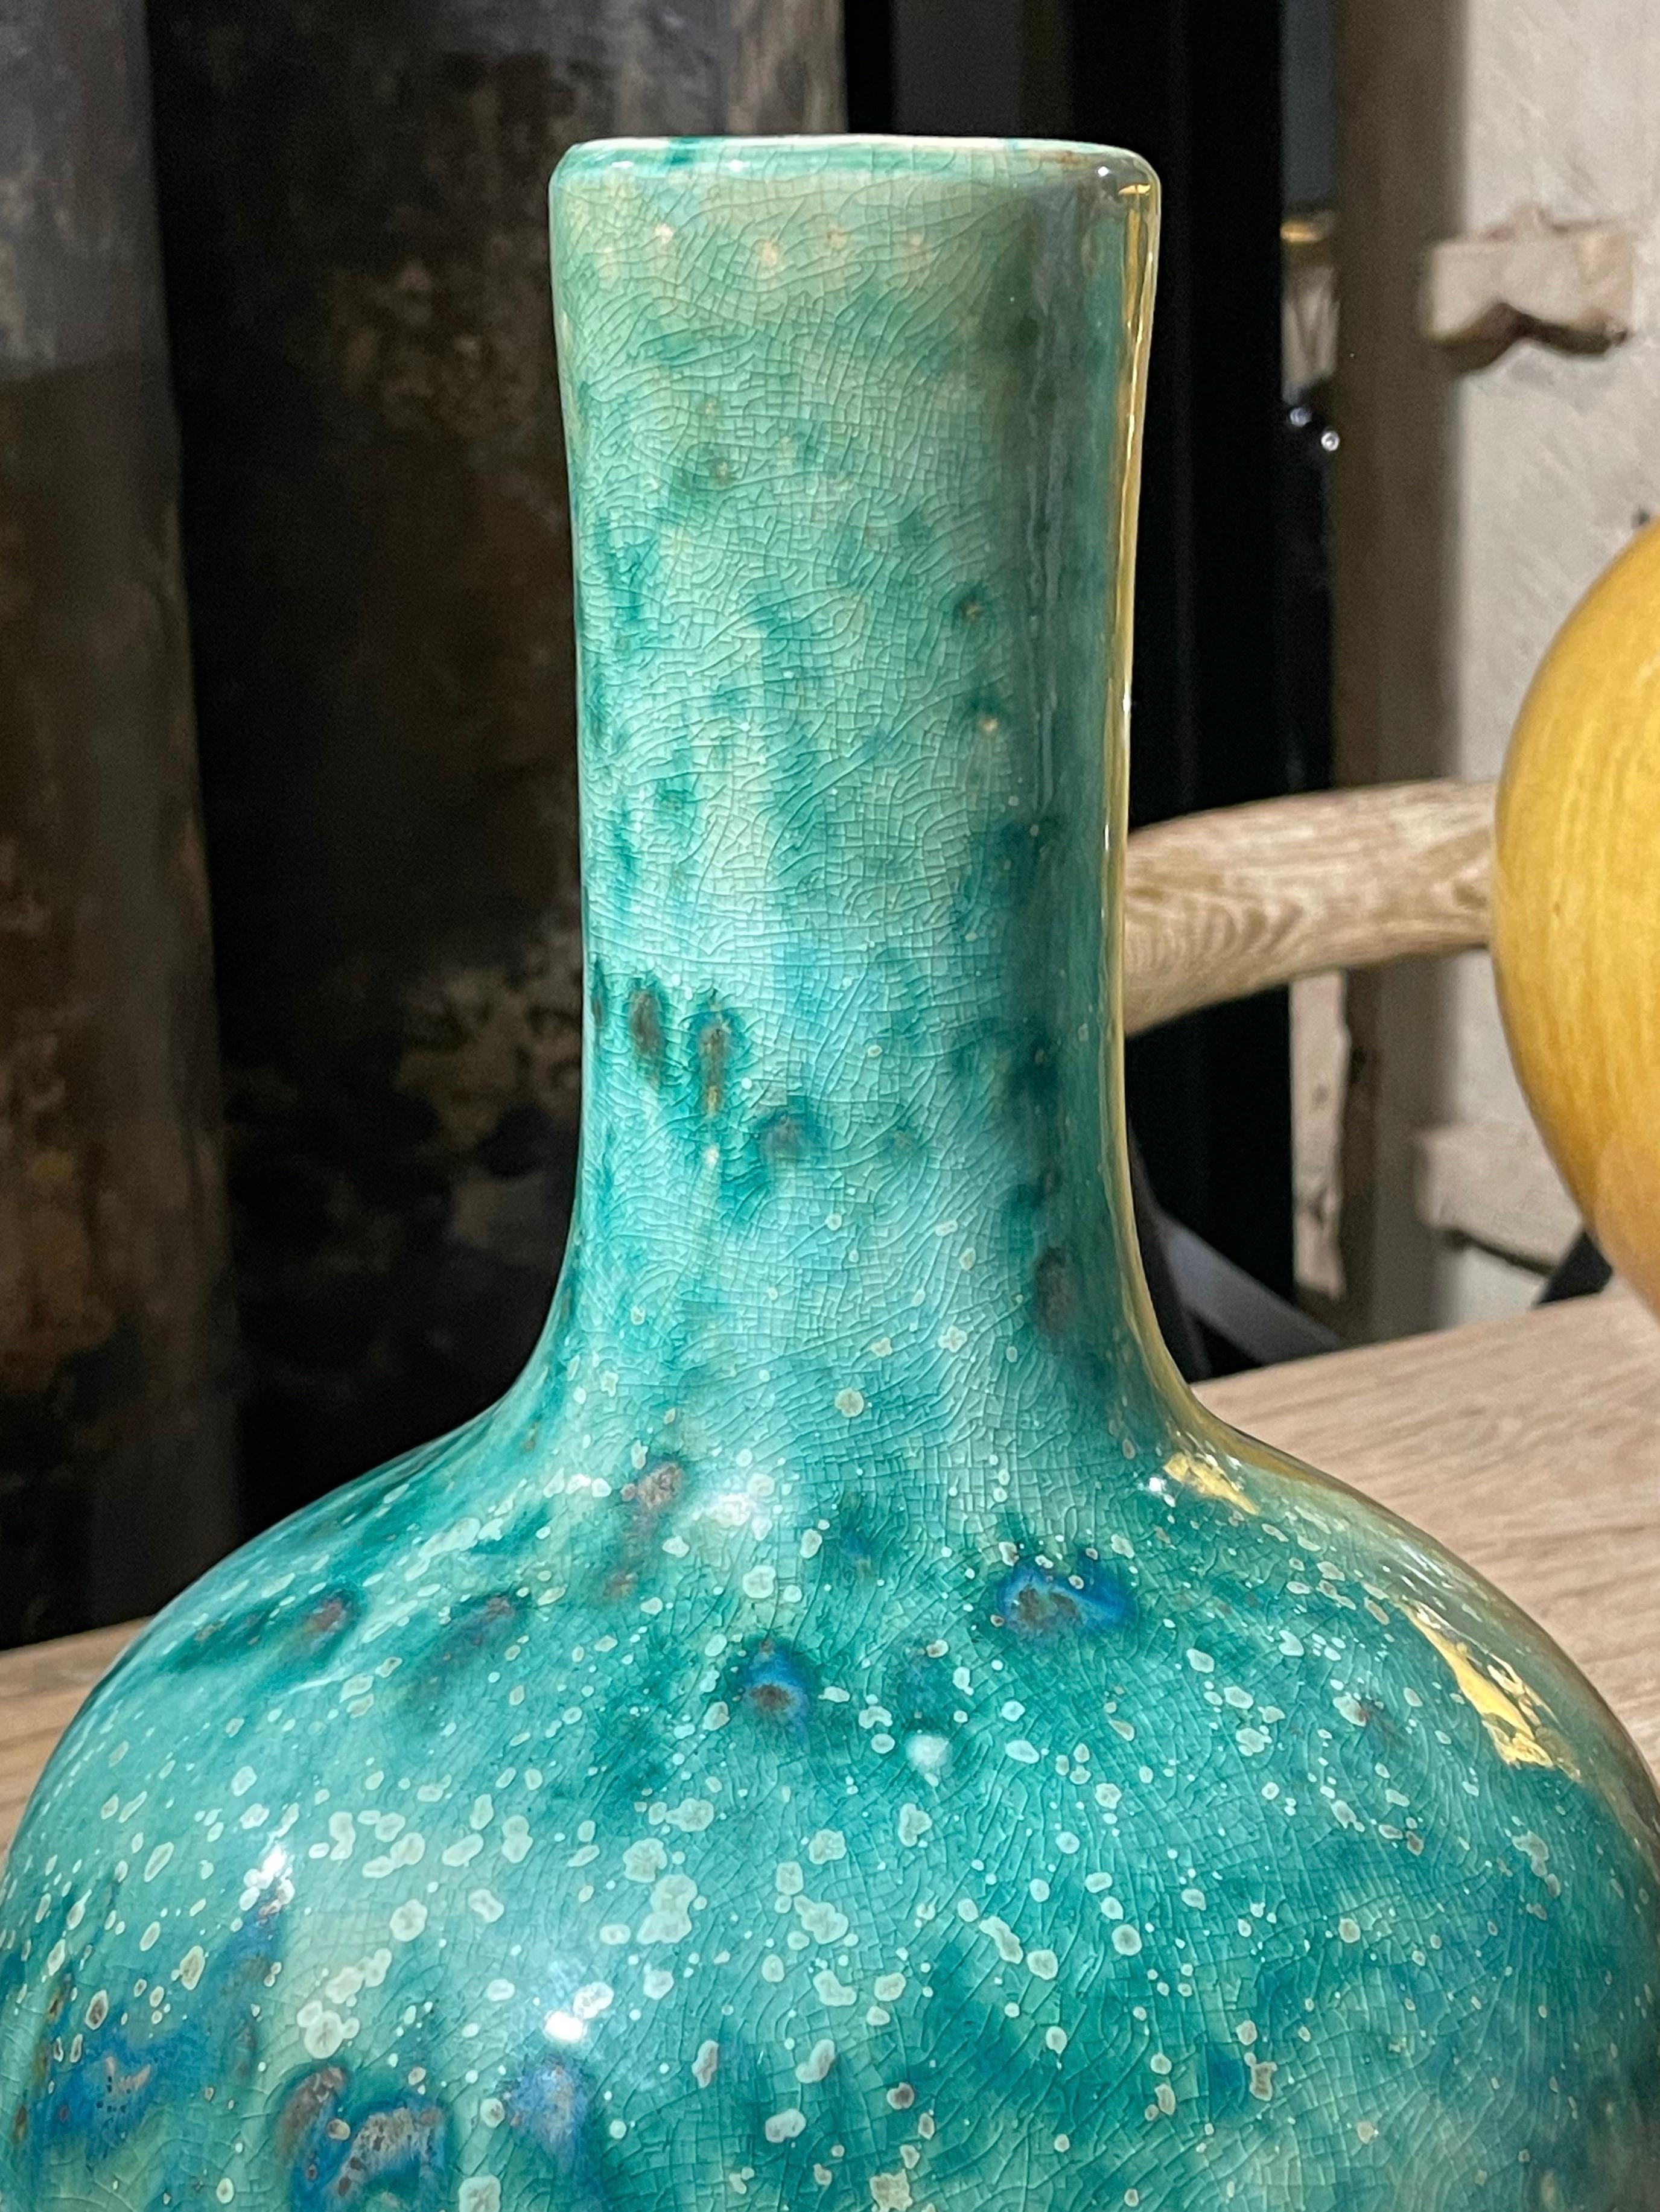 Turquoise Mottled Glaze Funnel Shape Vase, China, Contemporary In New Condition For Sale In New York, NY